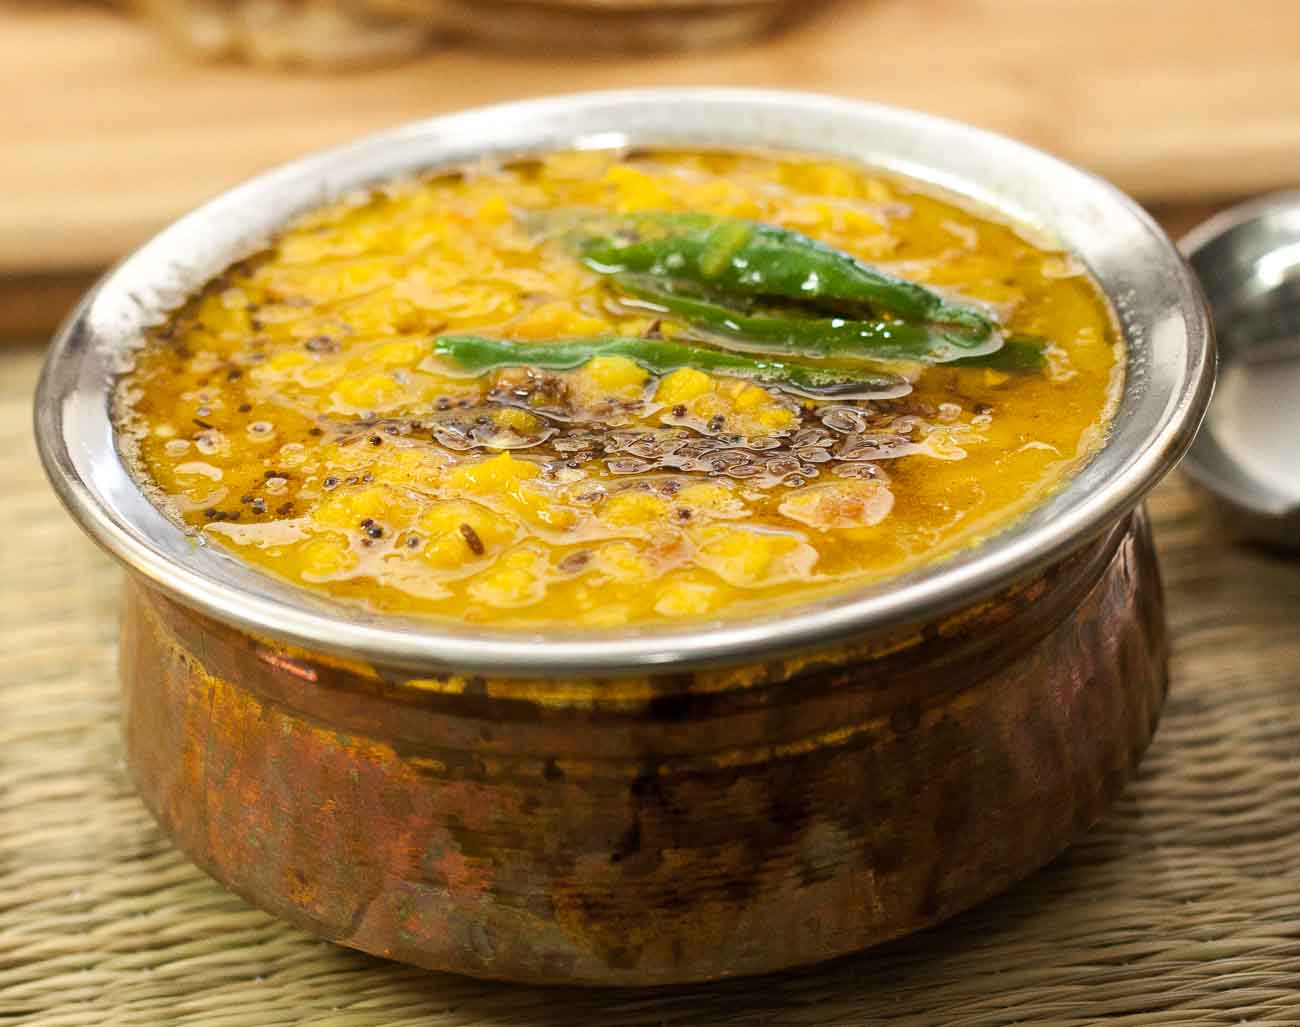 Give lentils a Punjabi test! This has been the secret recipe